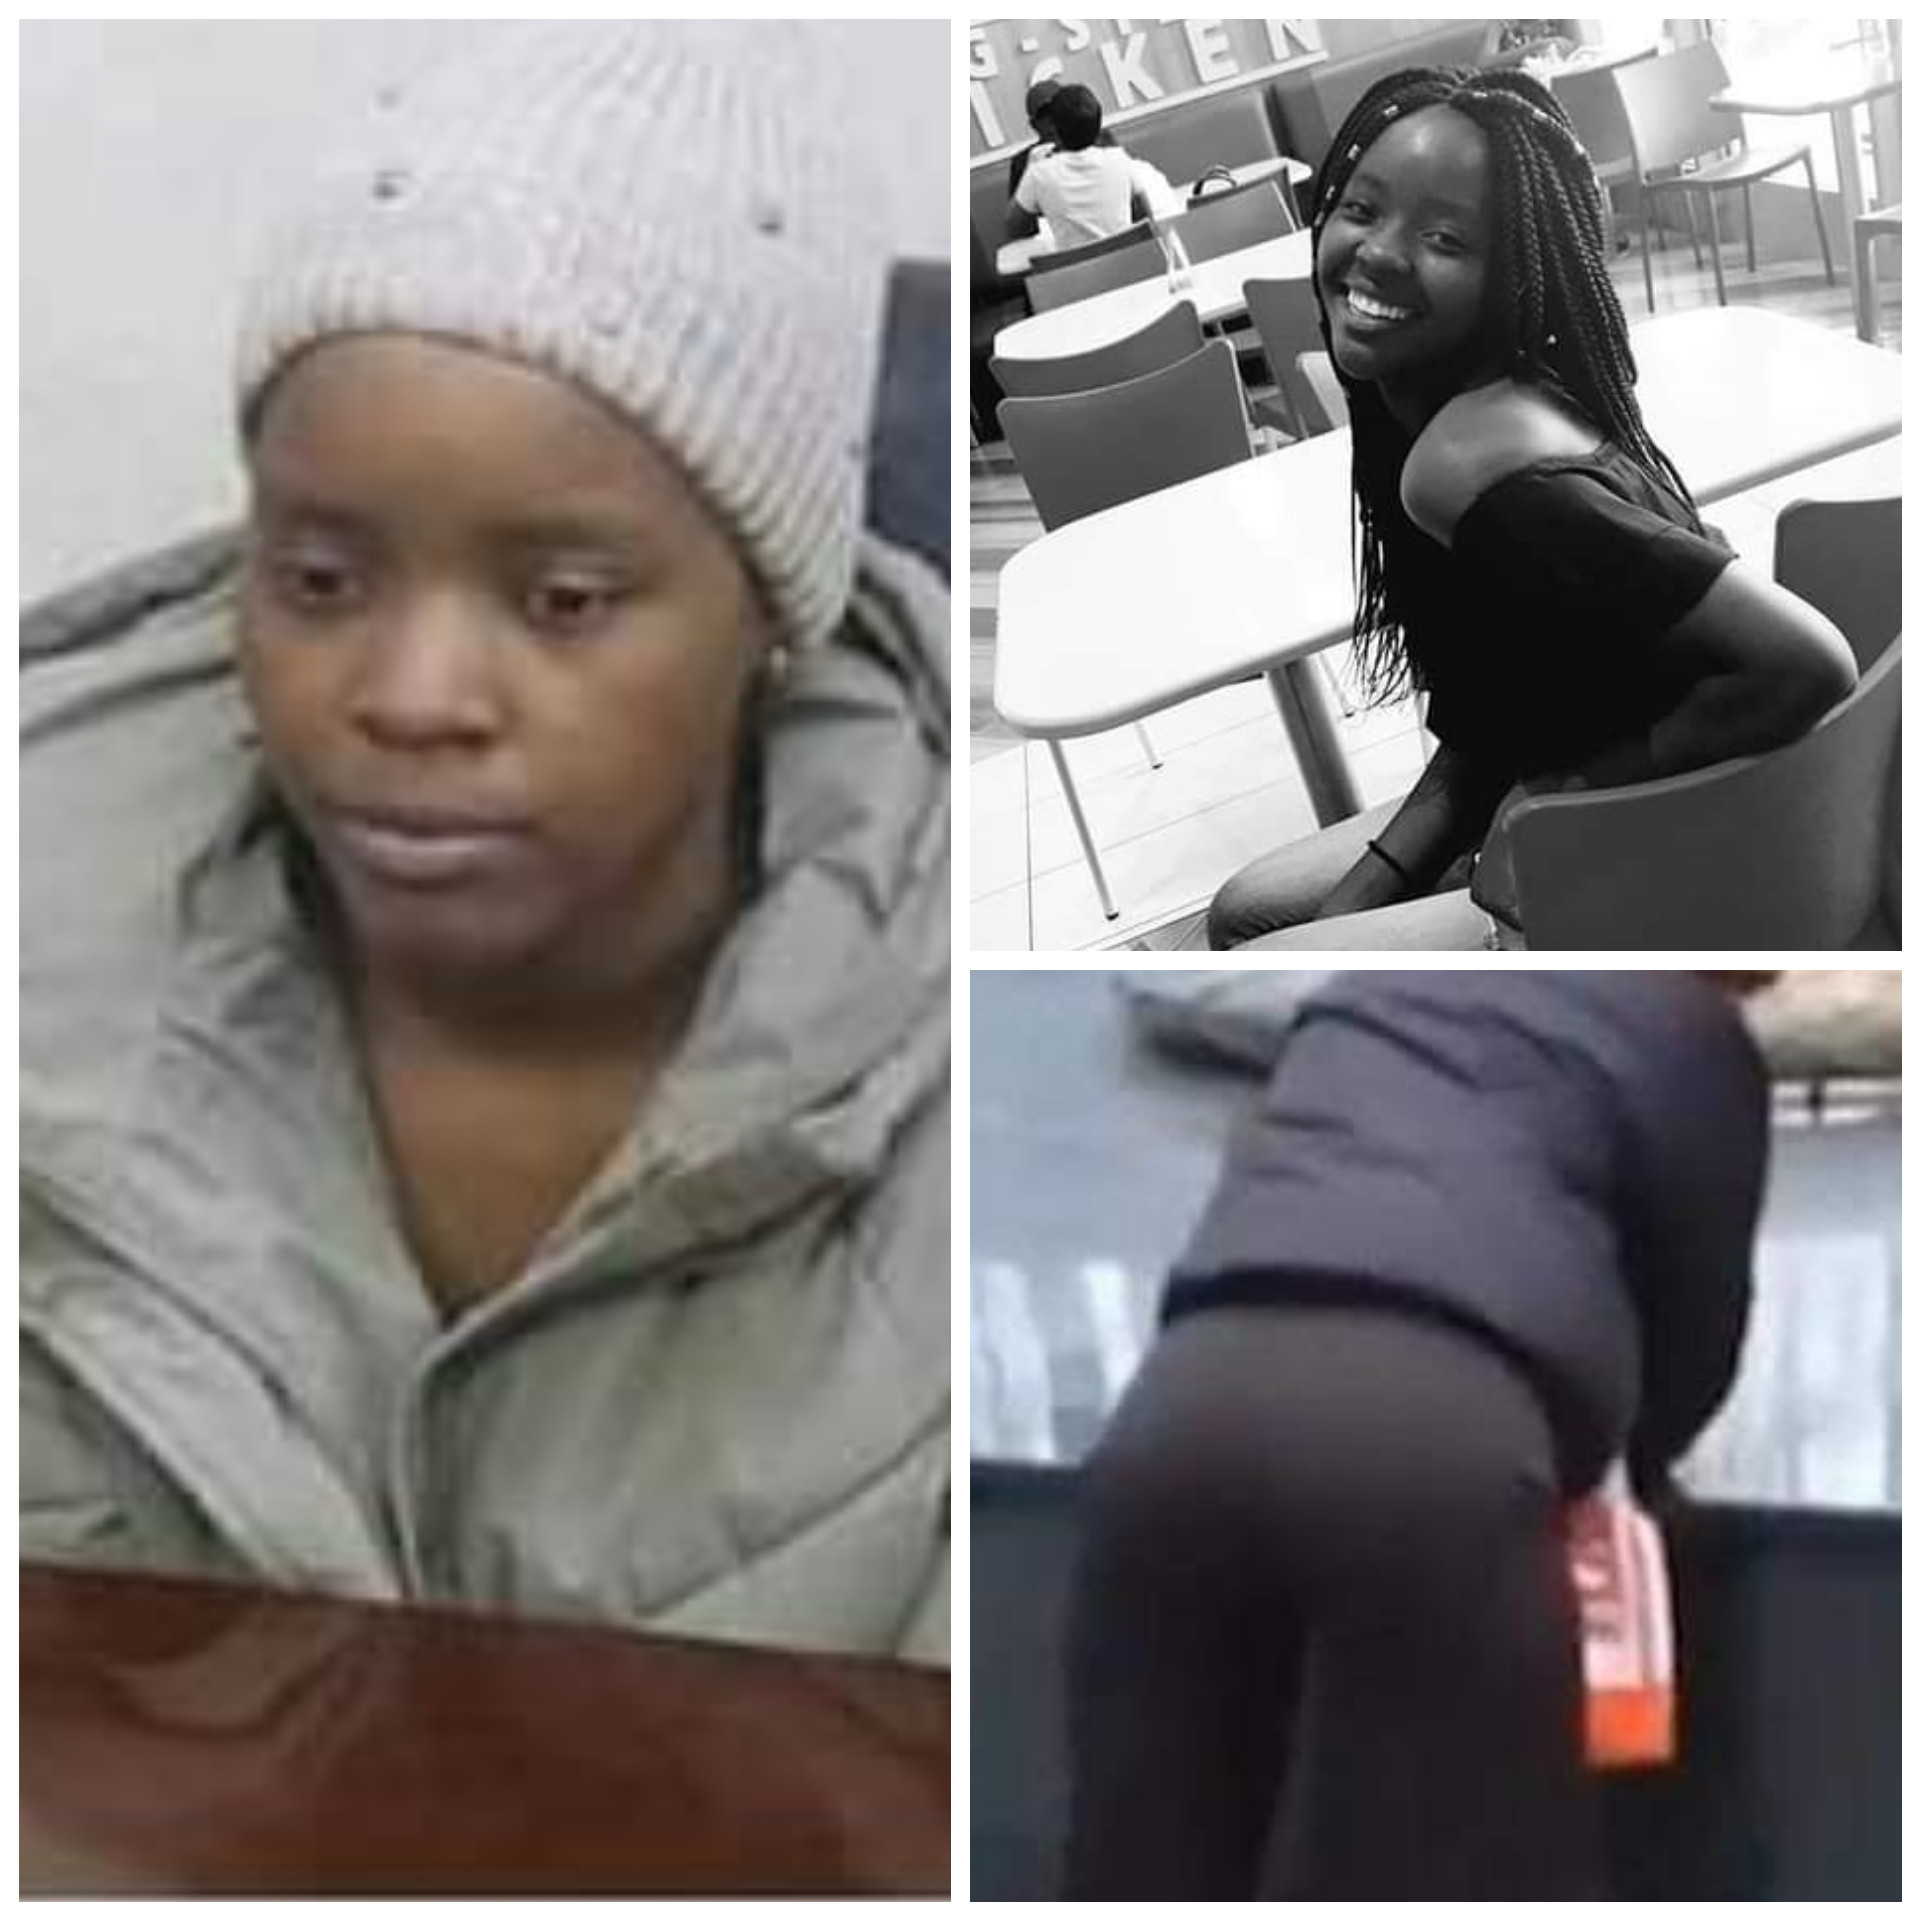 21-year-old Zambian student arrested in Russia for twerking at war memorial - VIDEO. 60